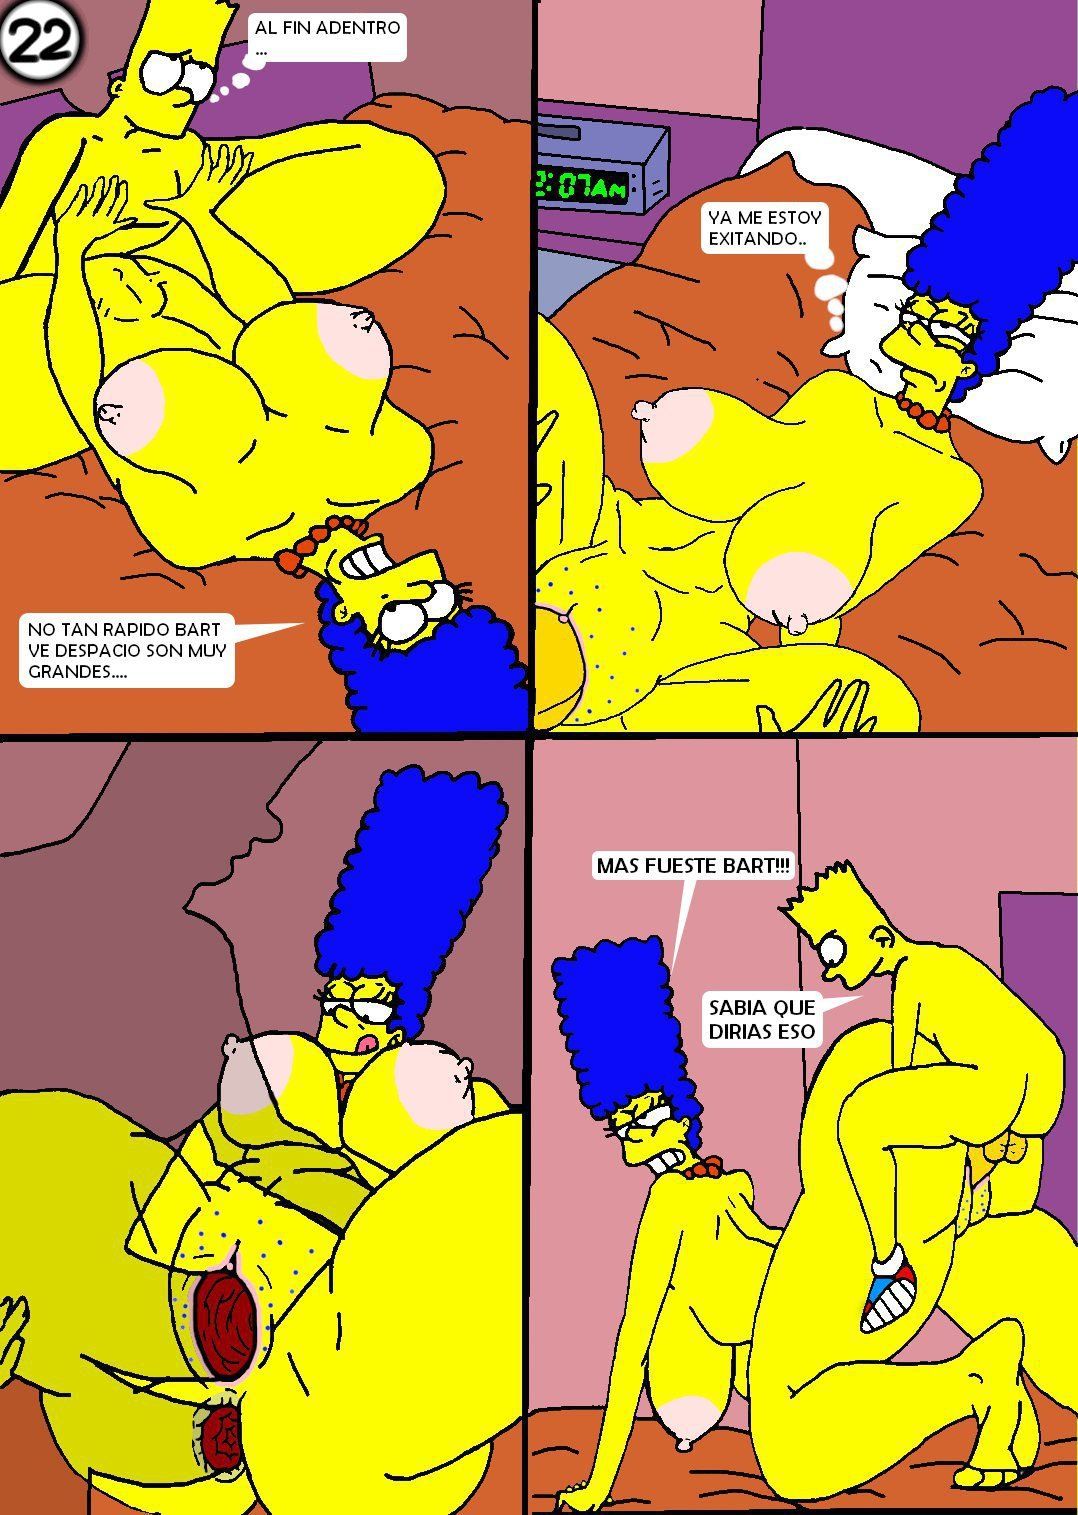 Marge simpsons gets fucked hard in ass